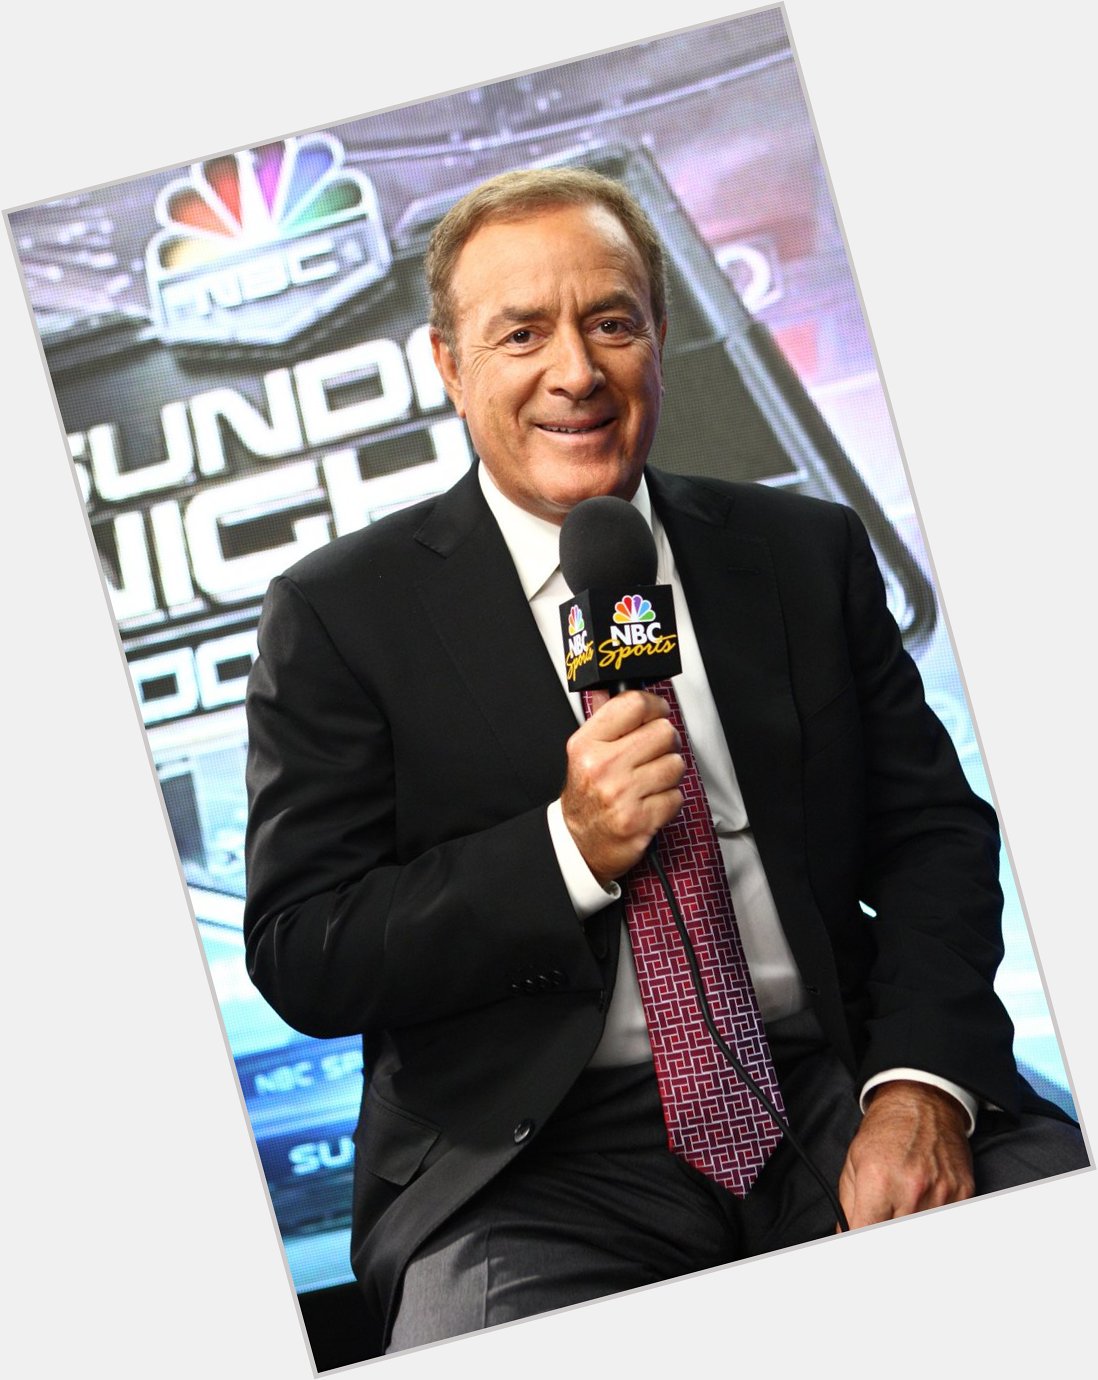 We would like to wish a happy 71st birthday to legendary sportscaster Al Michaels! 